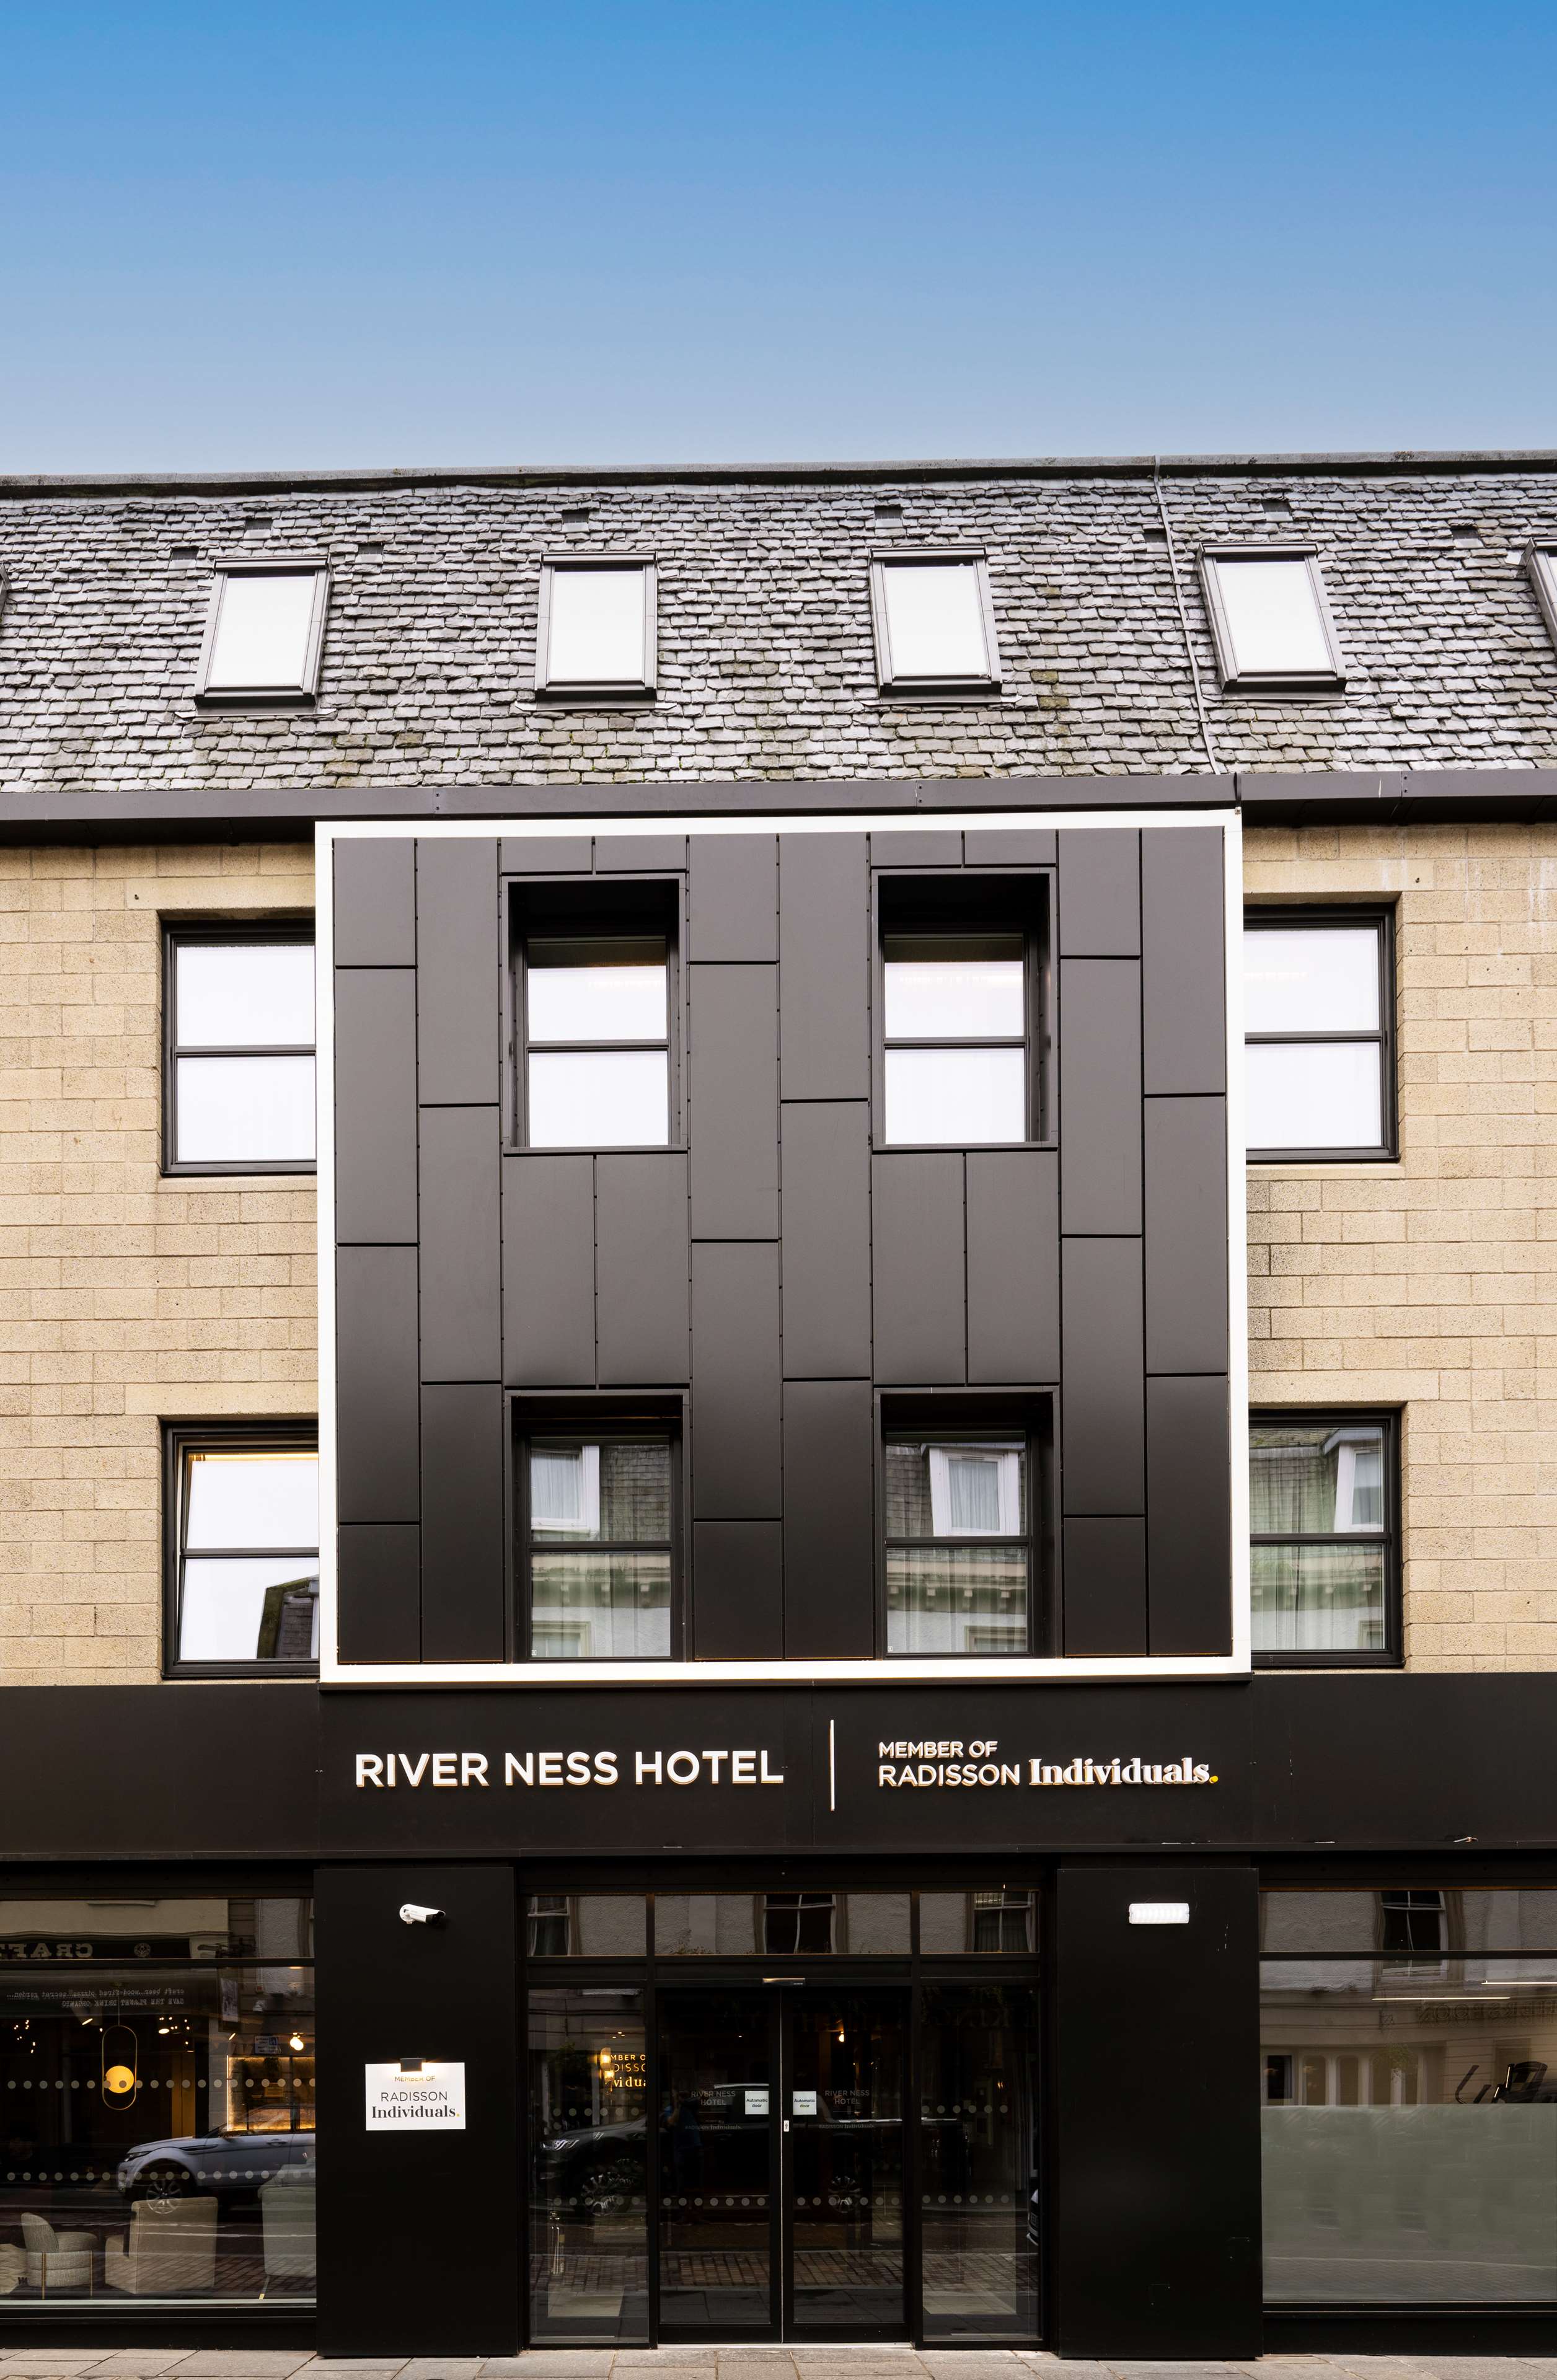 Images River Ness Hotel, a member of Radisson Individuals